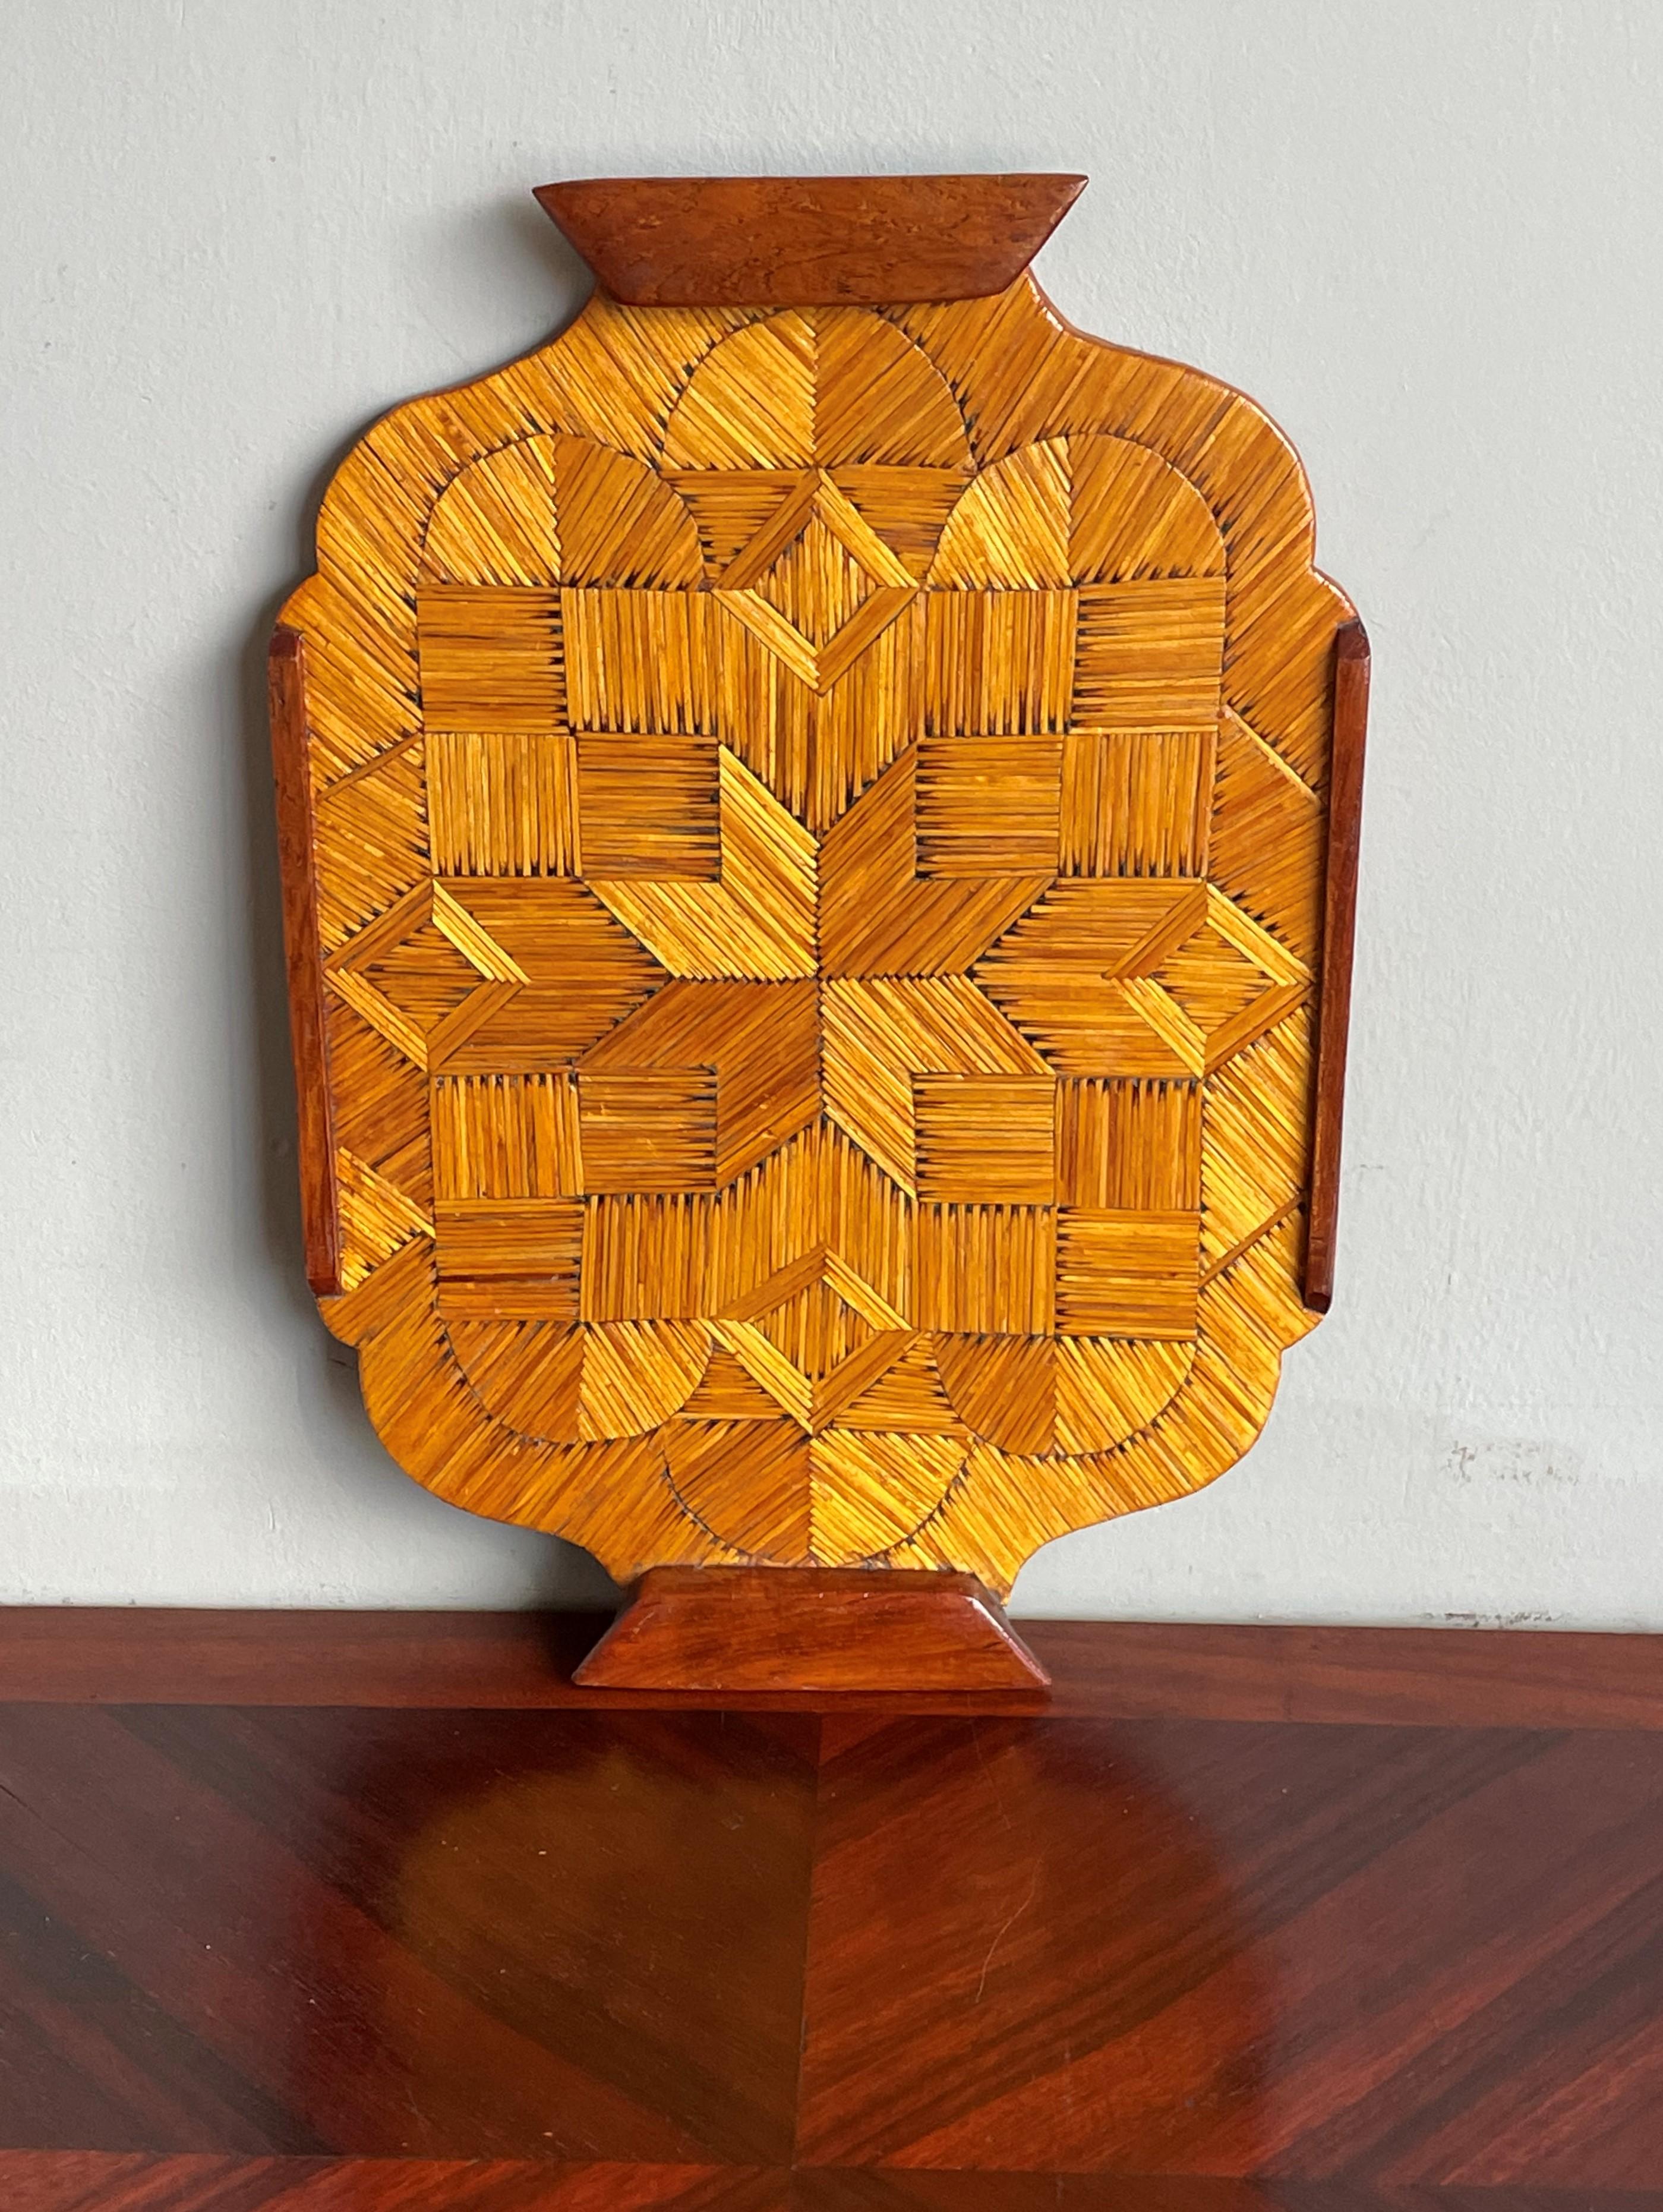 European Midcentury Folk Art Serving Tray, Handmade of Burnt Matches in Parquetry Pattern For Sale